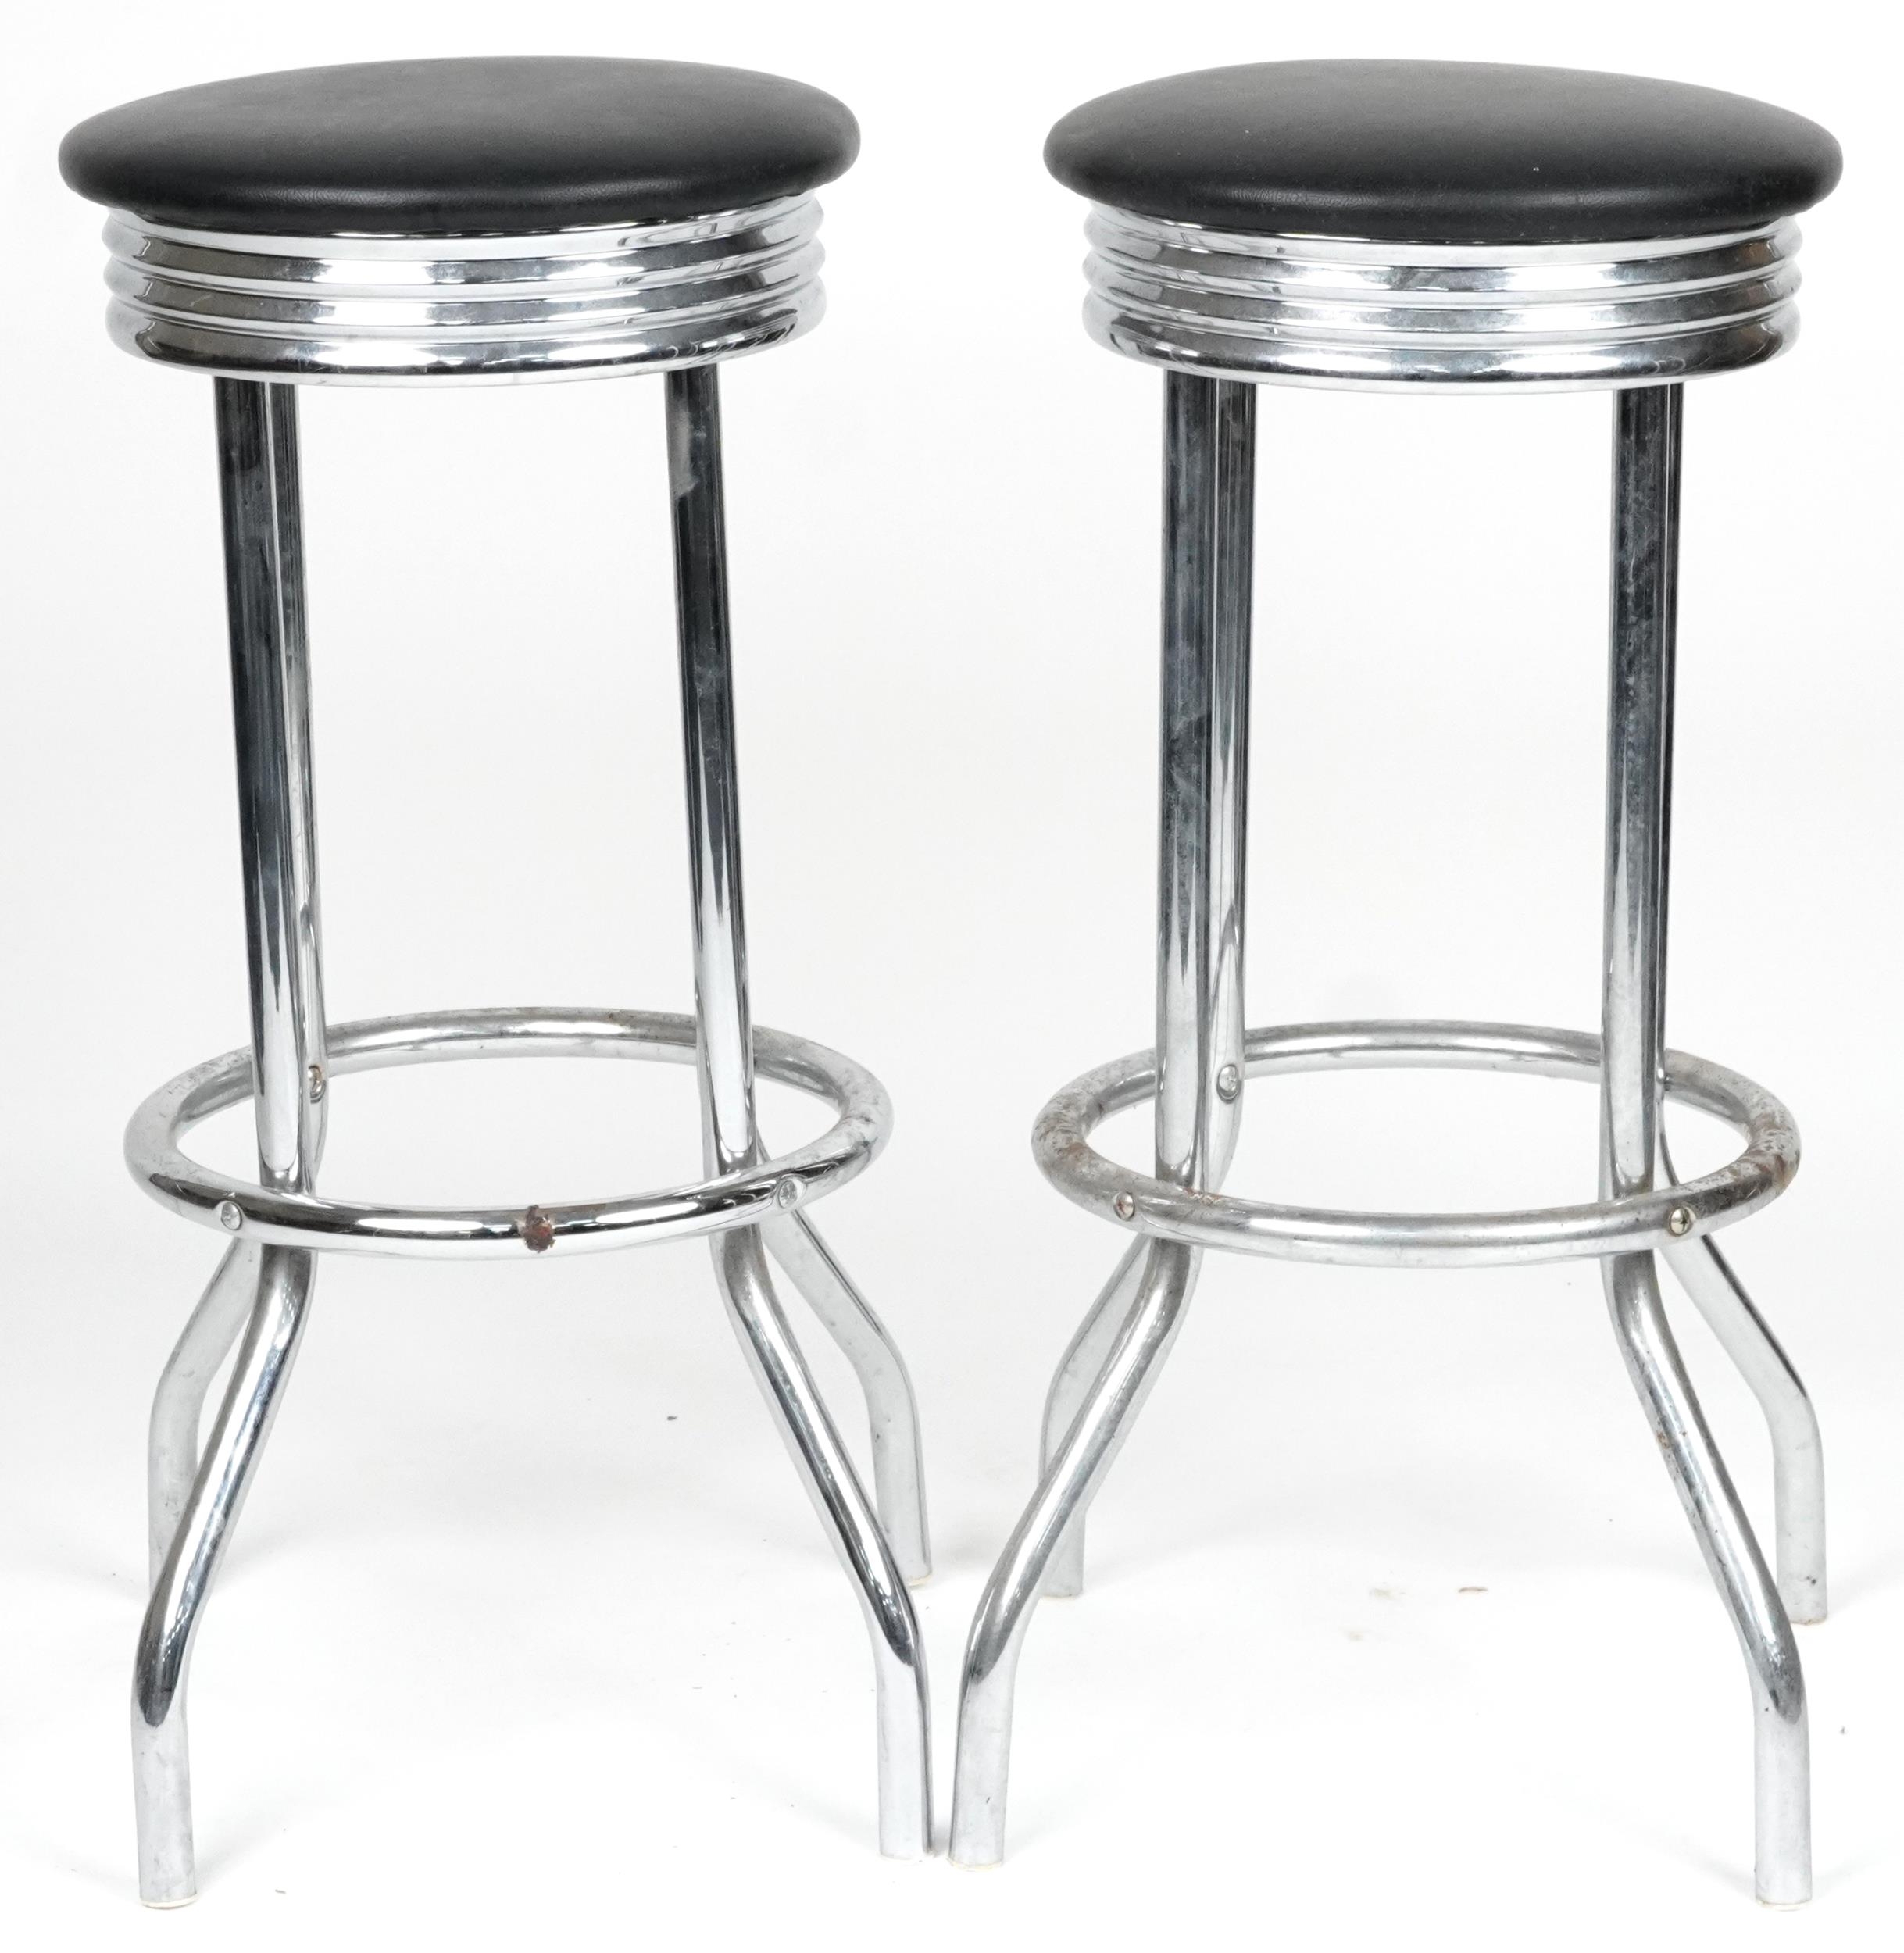 Pair of chrome breakfast bar stools with black faux leather cushioned seats, each 77cm high - Image 3 of 3